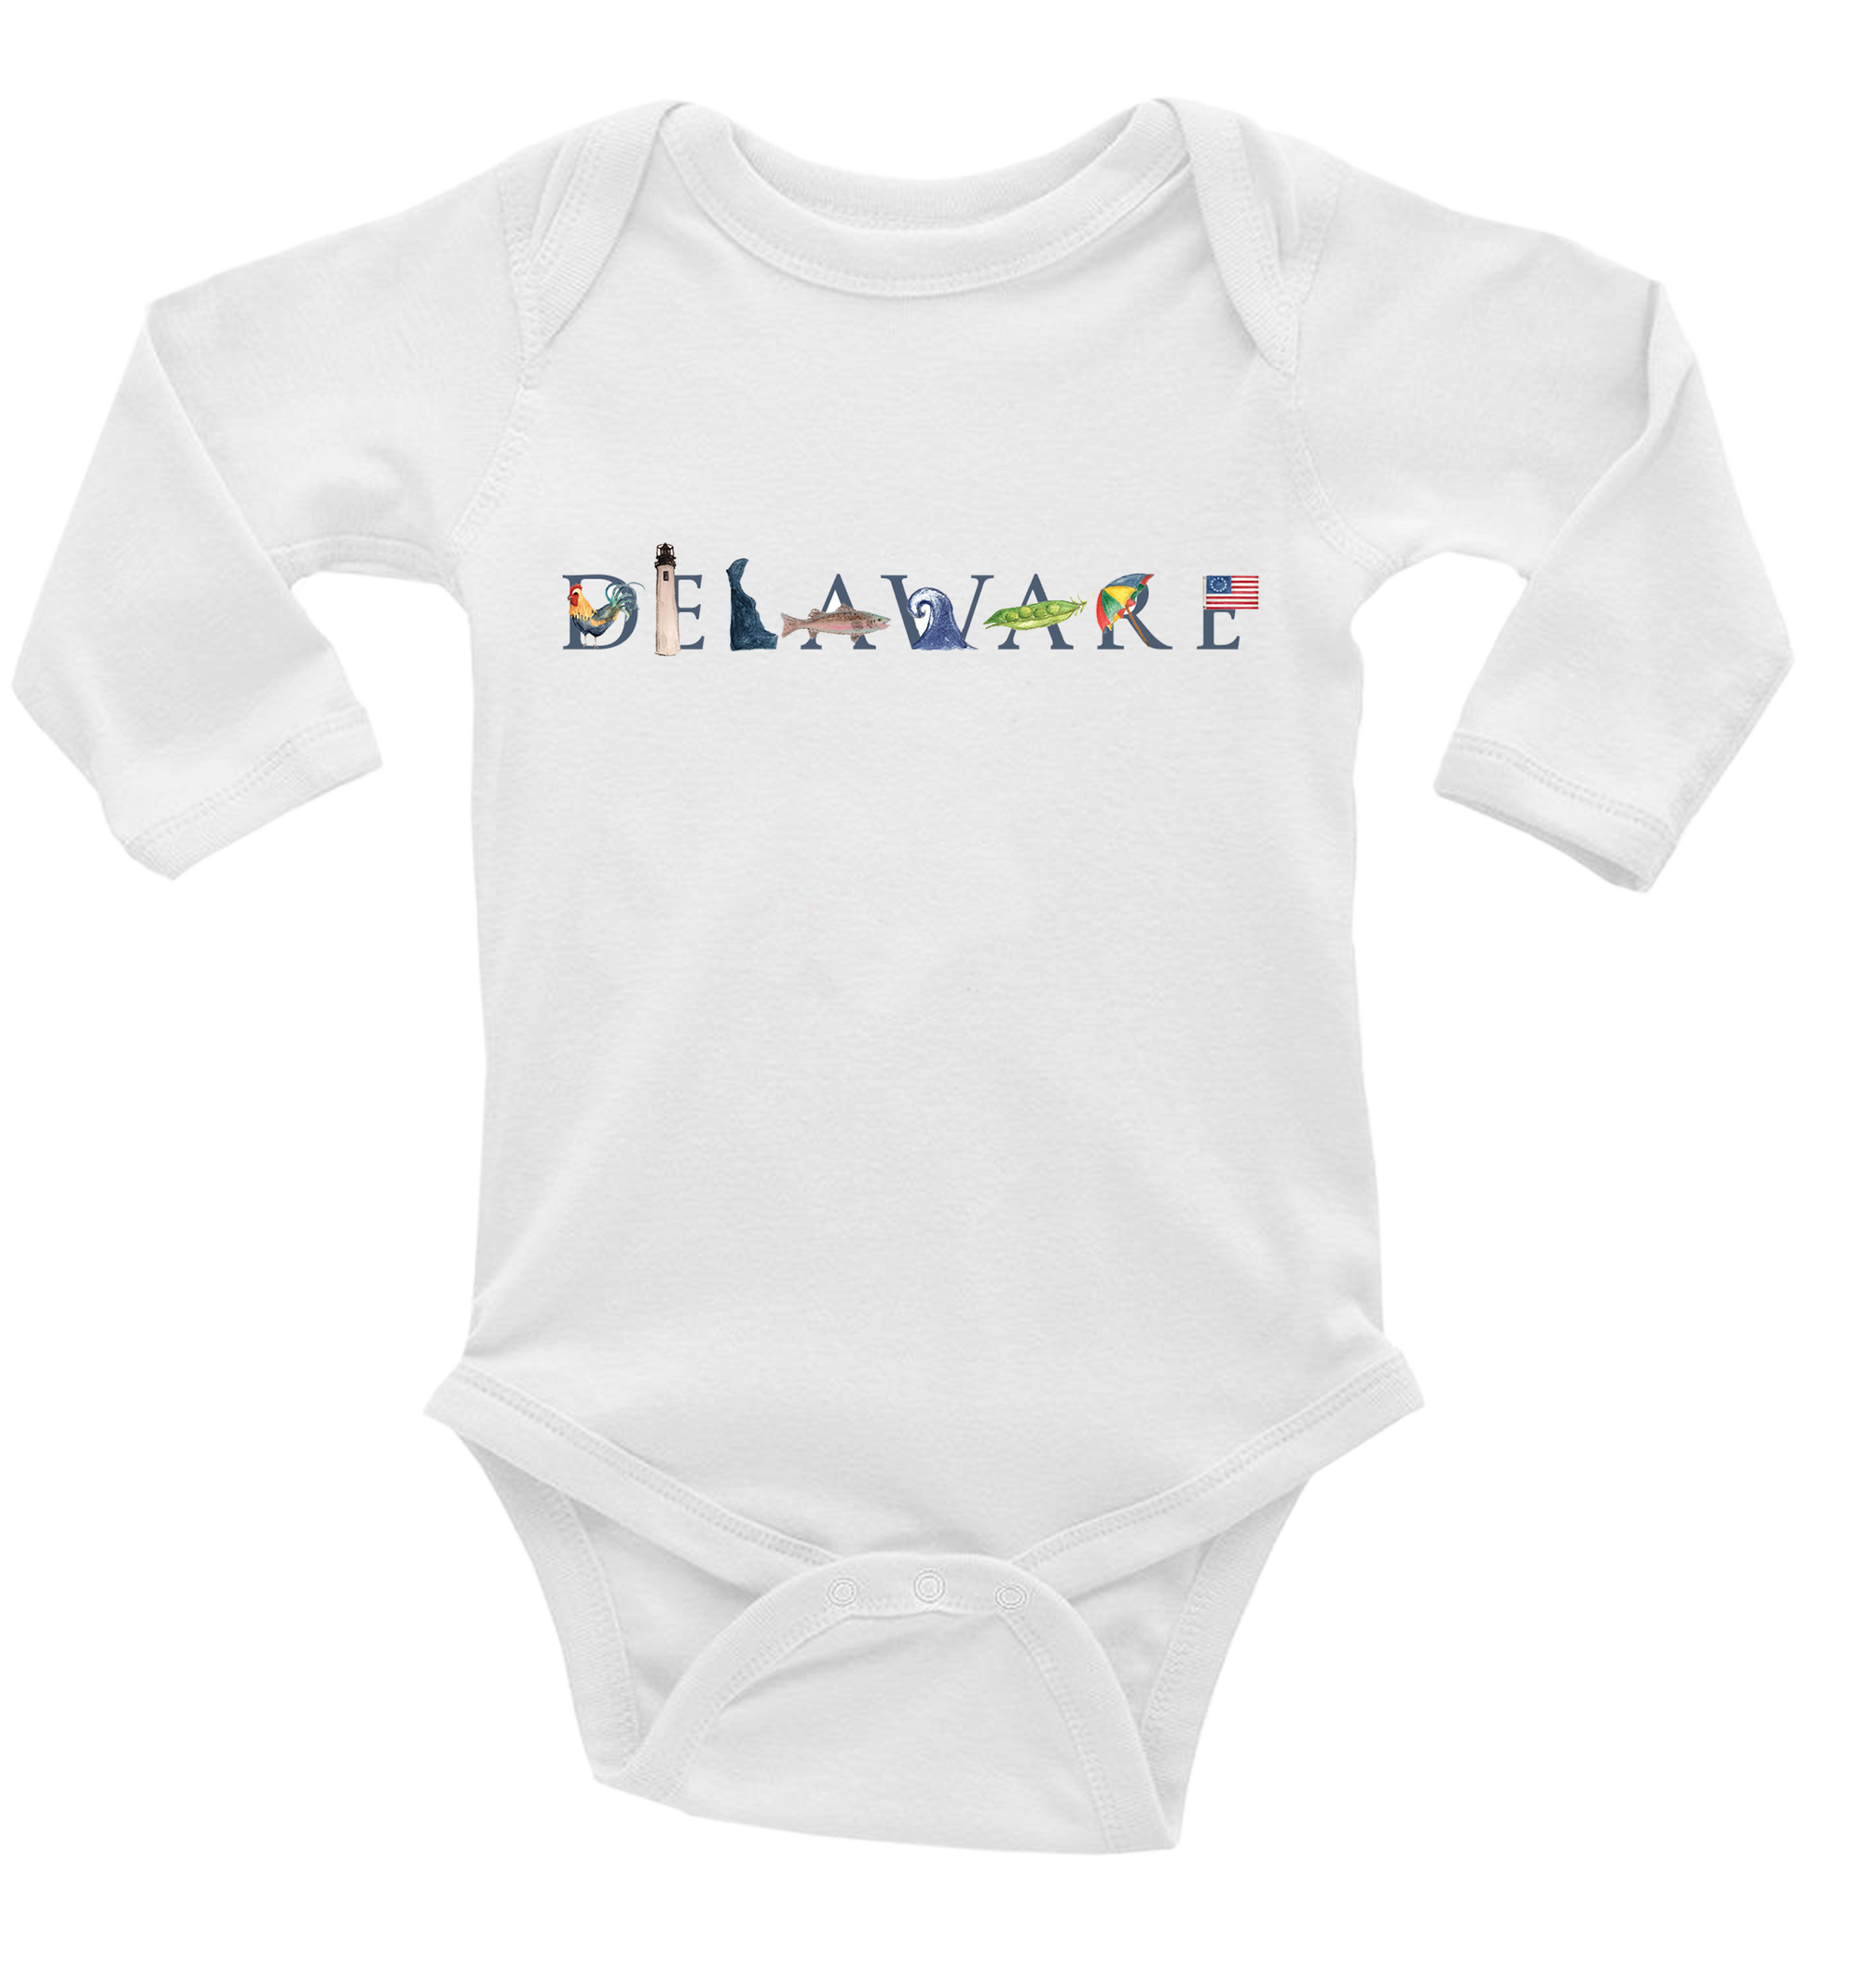 Delaware baby snap up long sleeve